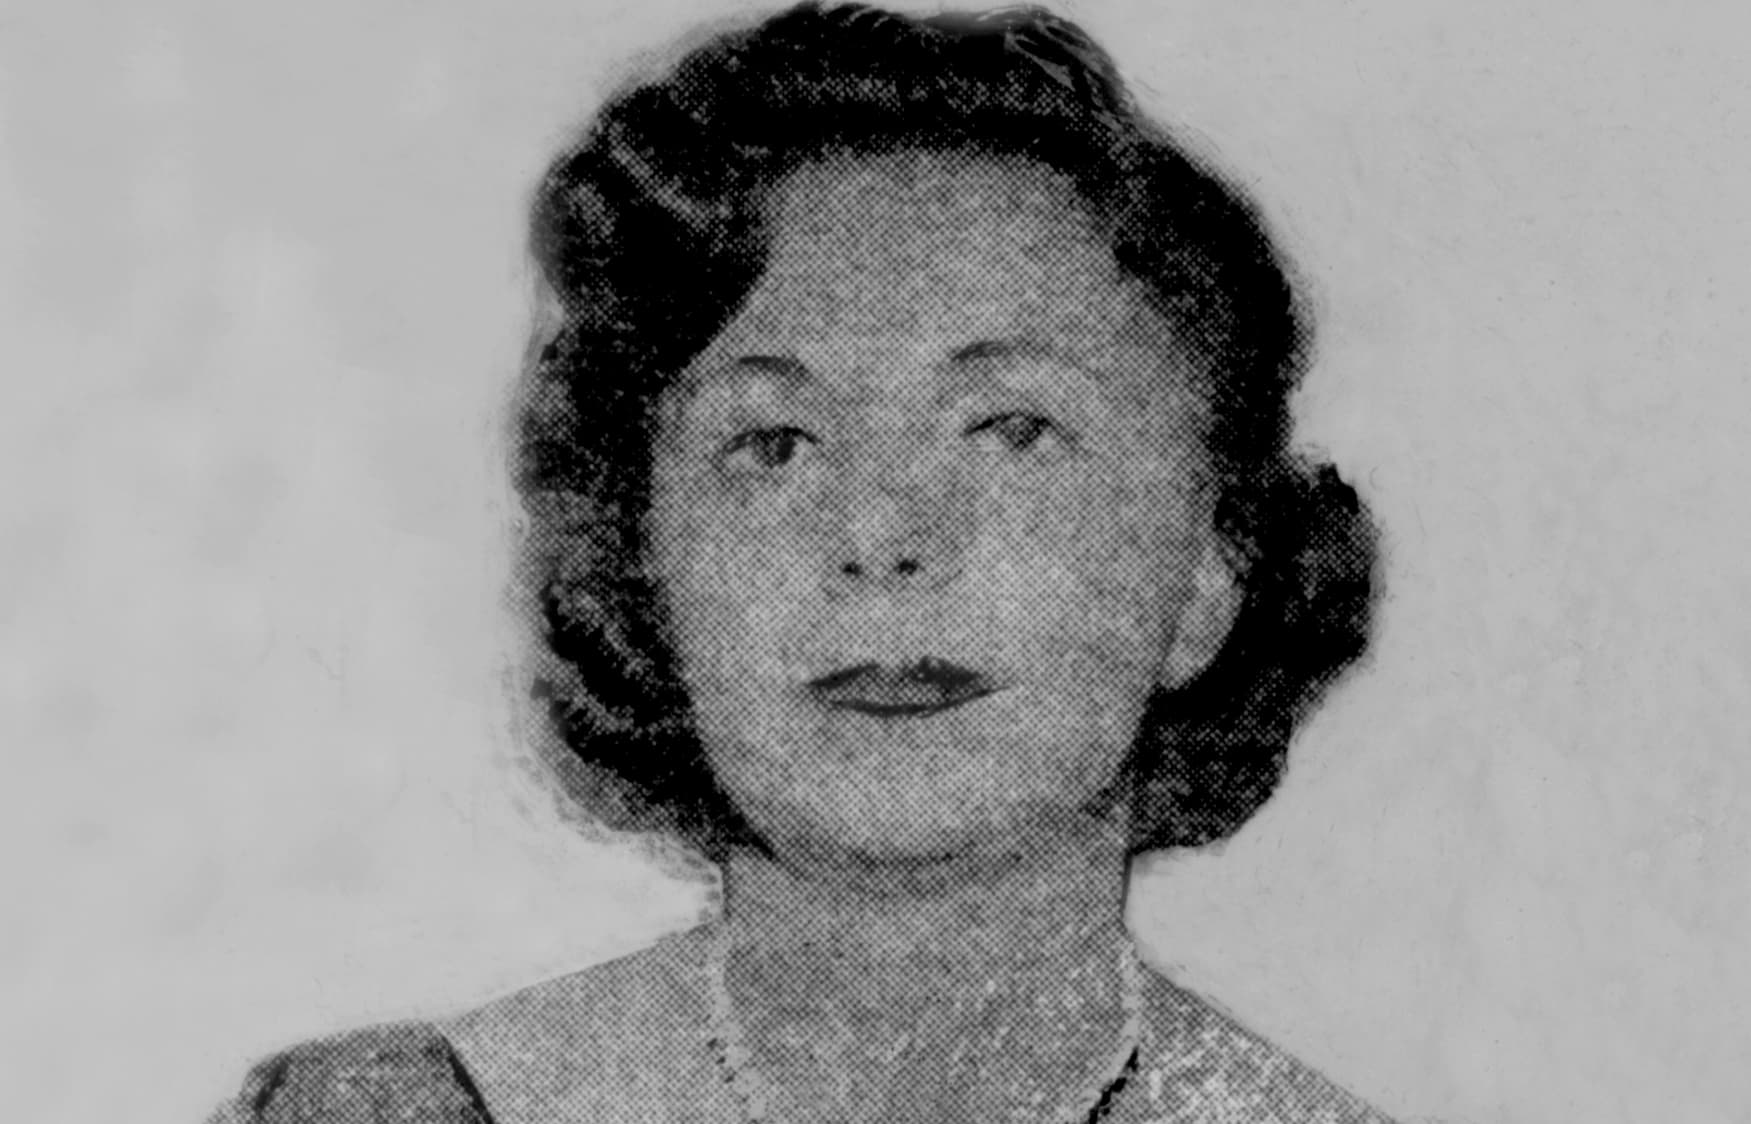 Cynthia Grierson-Jackson, was last seen alive in April 1960, her body has never been found.